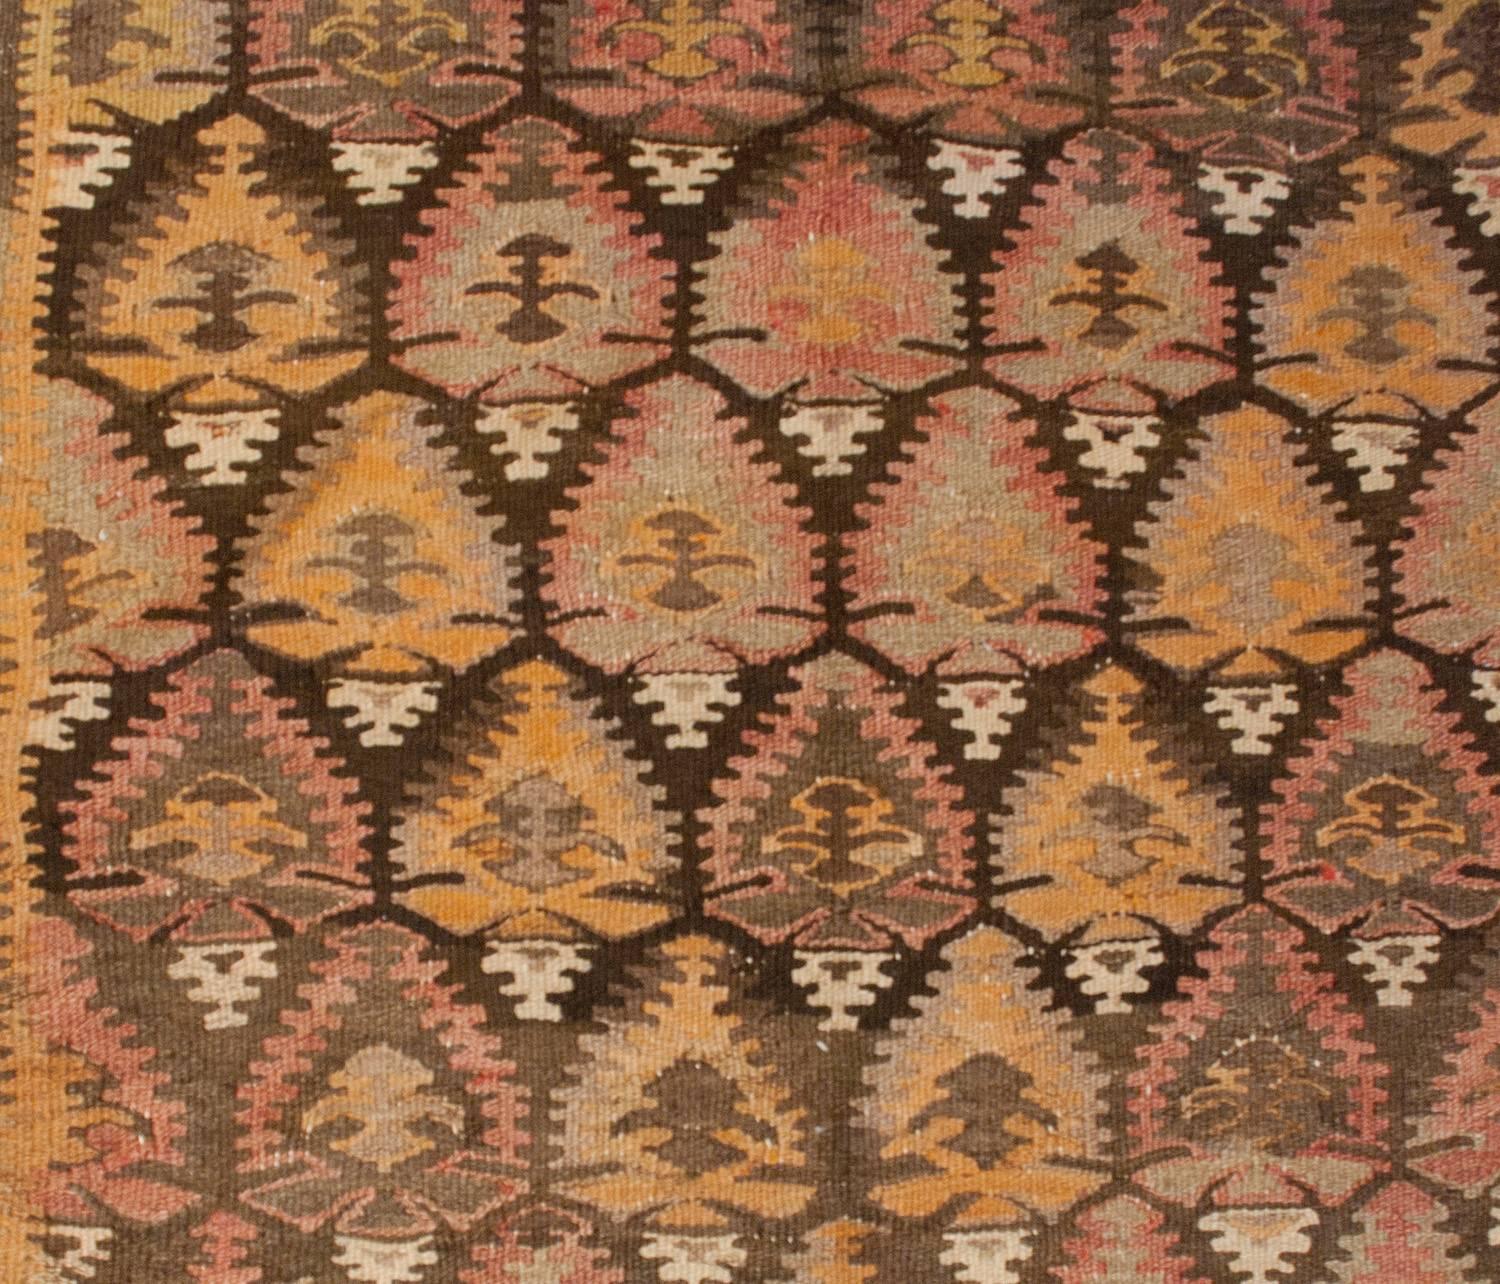 A wonderful early 20th century Persian Qazvin Kilim runner with a masterfully woven pattern of stylized tree-of-life patterns woven in brown, gold and pale red vegetable dyed wool. The border is composed of three distinct patterns. The center is a